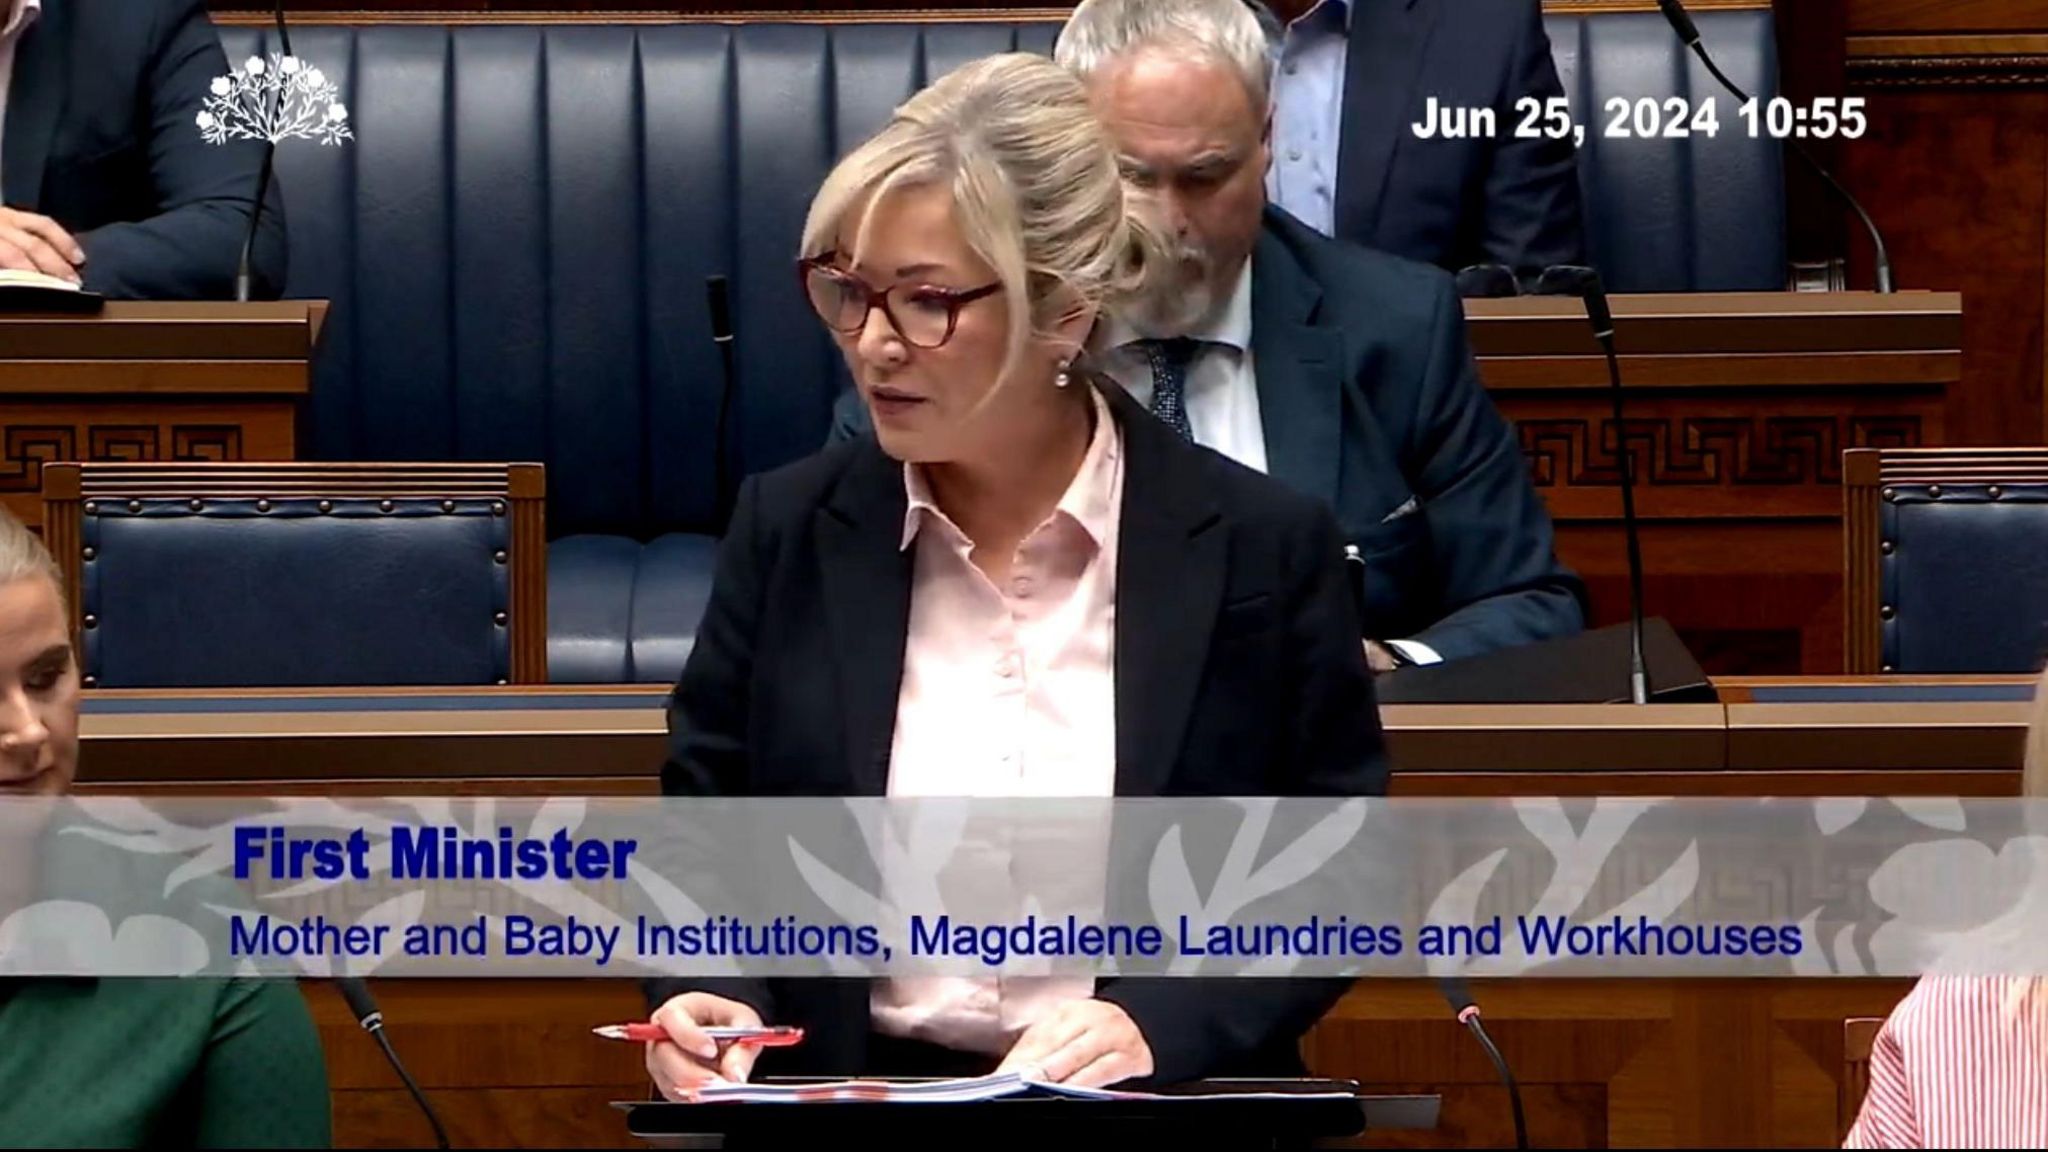 Screengrab of First Minister Michelle O'Neill in Stormont chambers as she makes a statement formally announcing a 12-week public consultation